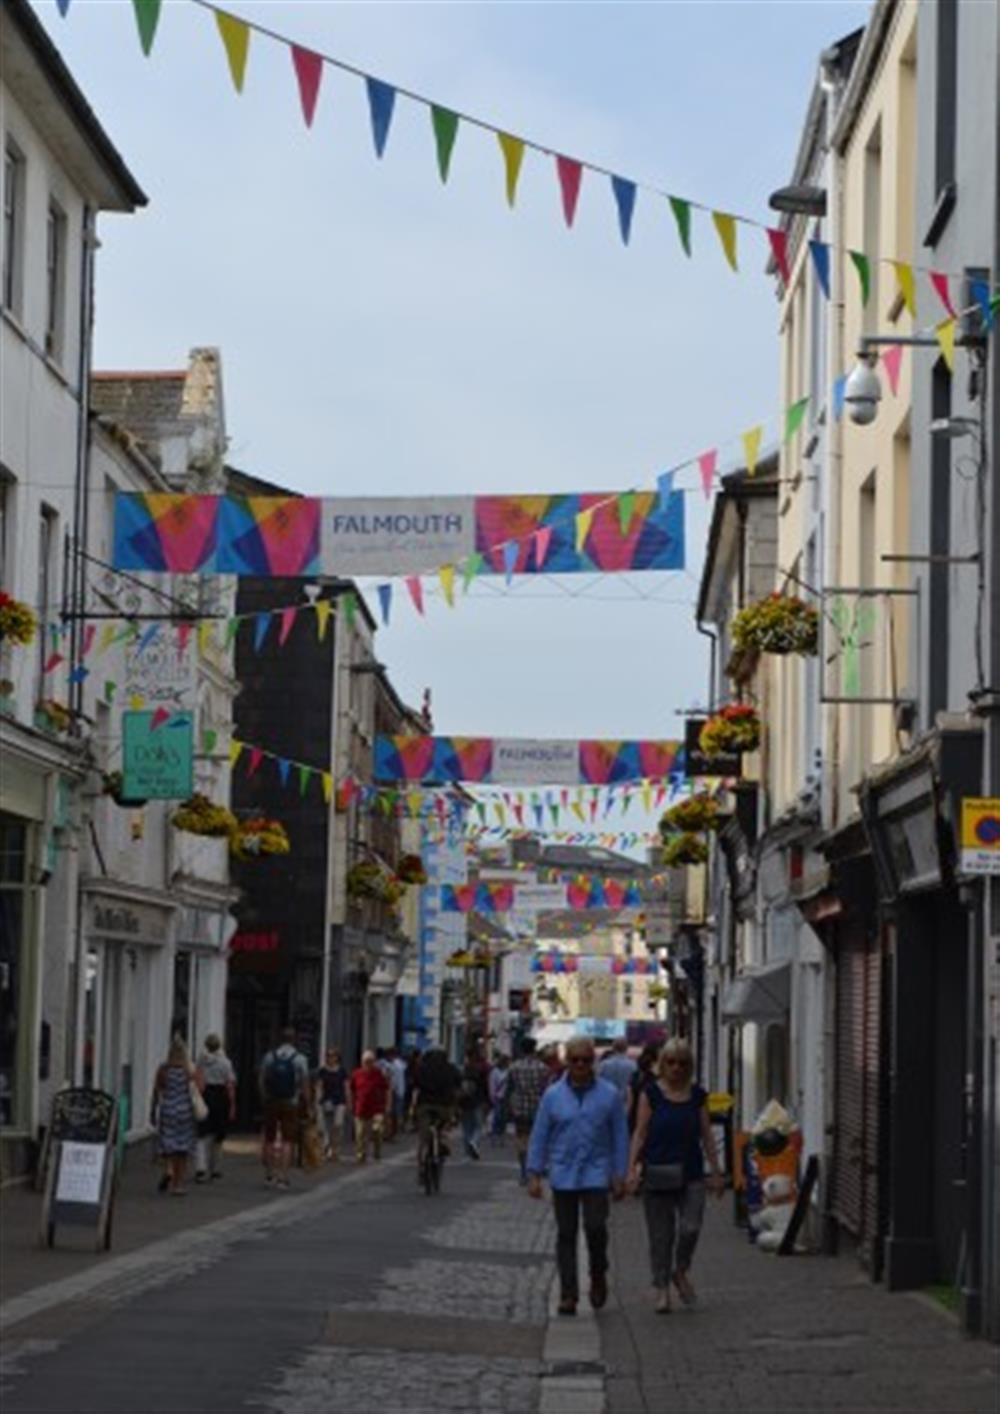 Falmouth town has all the usual shops, plus a range of restaurants, cafes and art galleries. at 33 Lower Stables in Maenporth